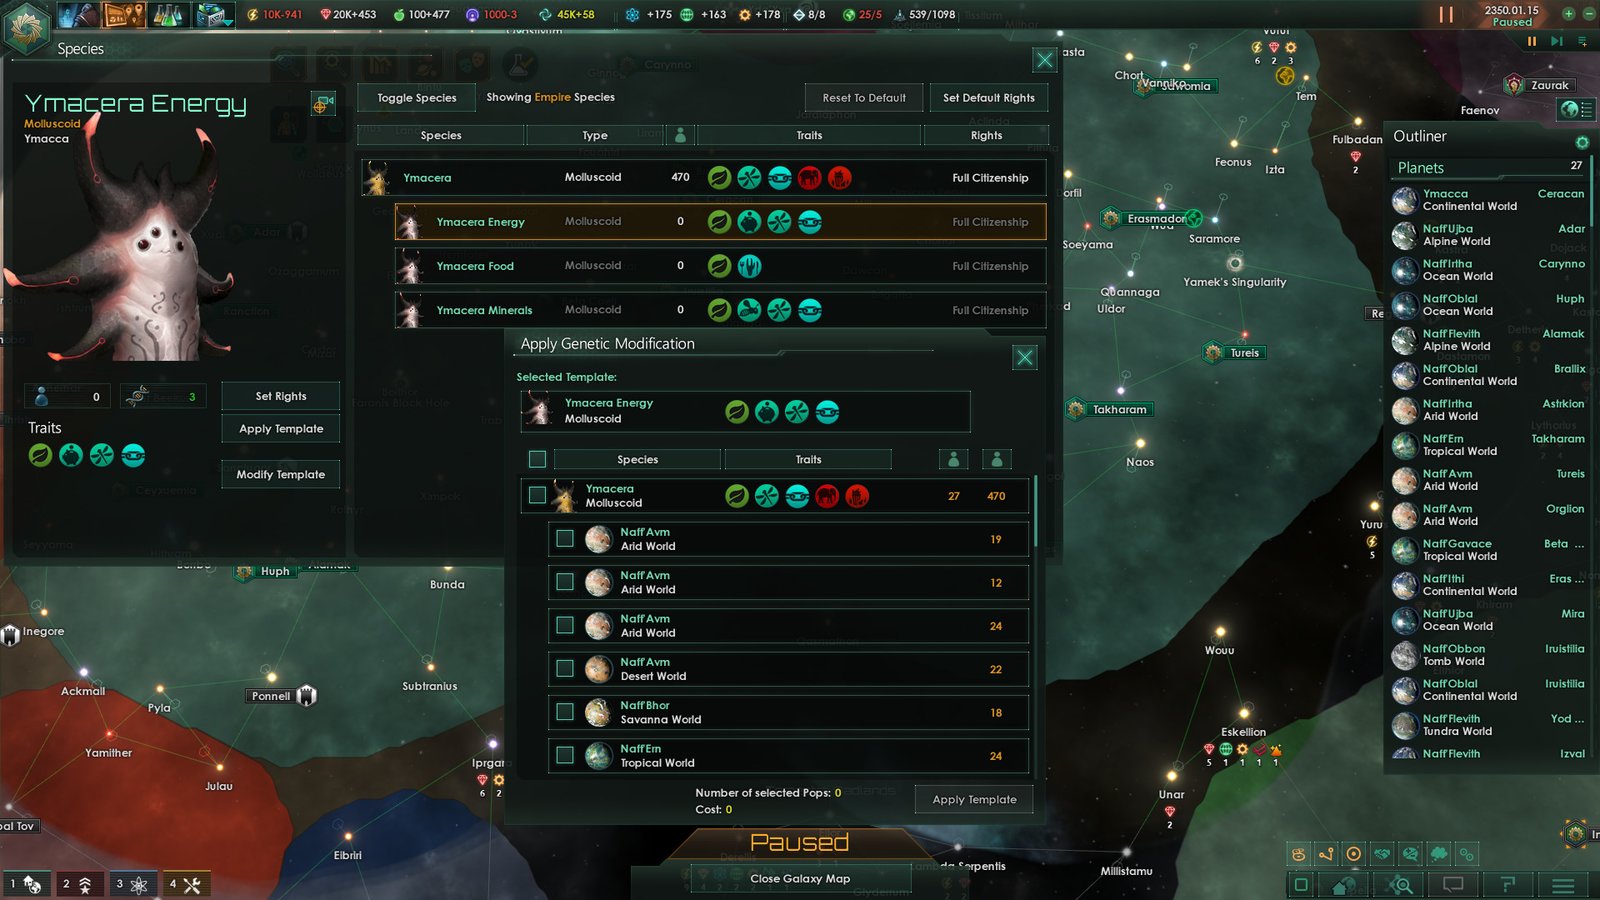 Stellaris: Synthetic Dawn Story Pack